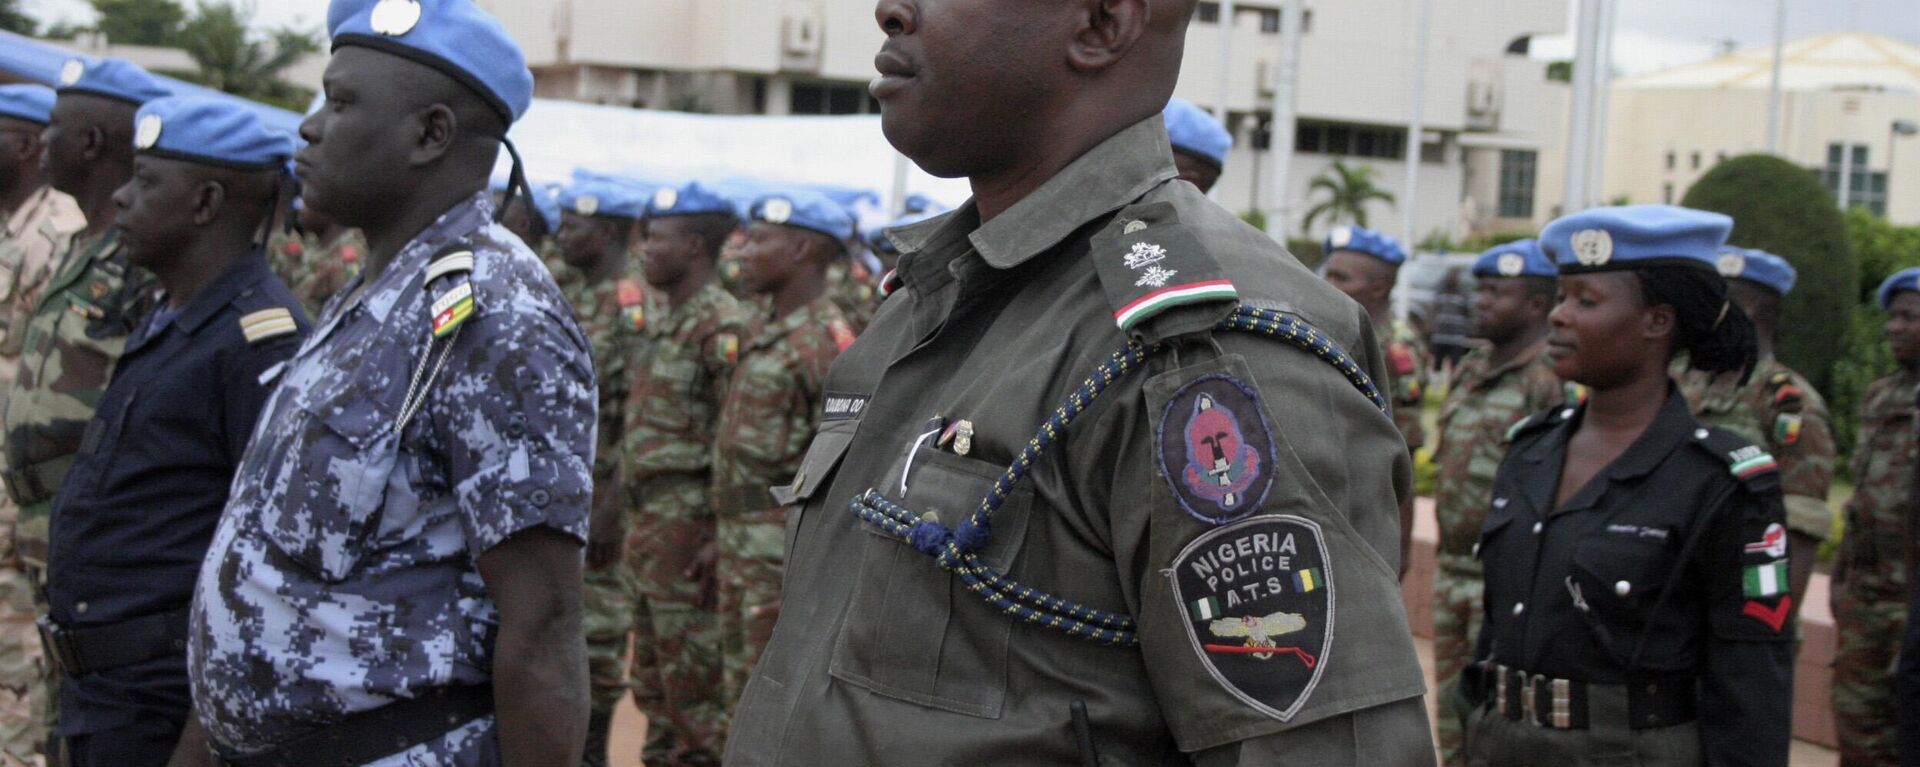 African soldiers and police who helped France take back control of Mali's north earlier this year participate in a ceremony formally transforming the force into a United Nations peacekeeping mission, in Bamako, Mali, Monday, July 1, 2013. T - Sputnik Africa, 1920, 27.06.2023